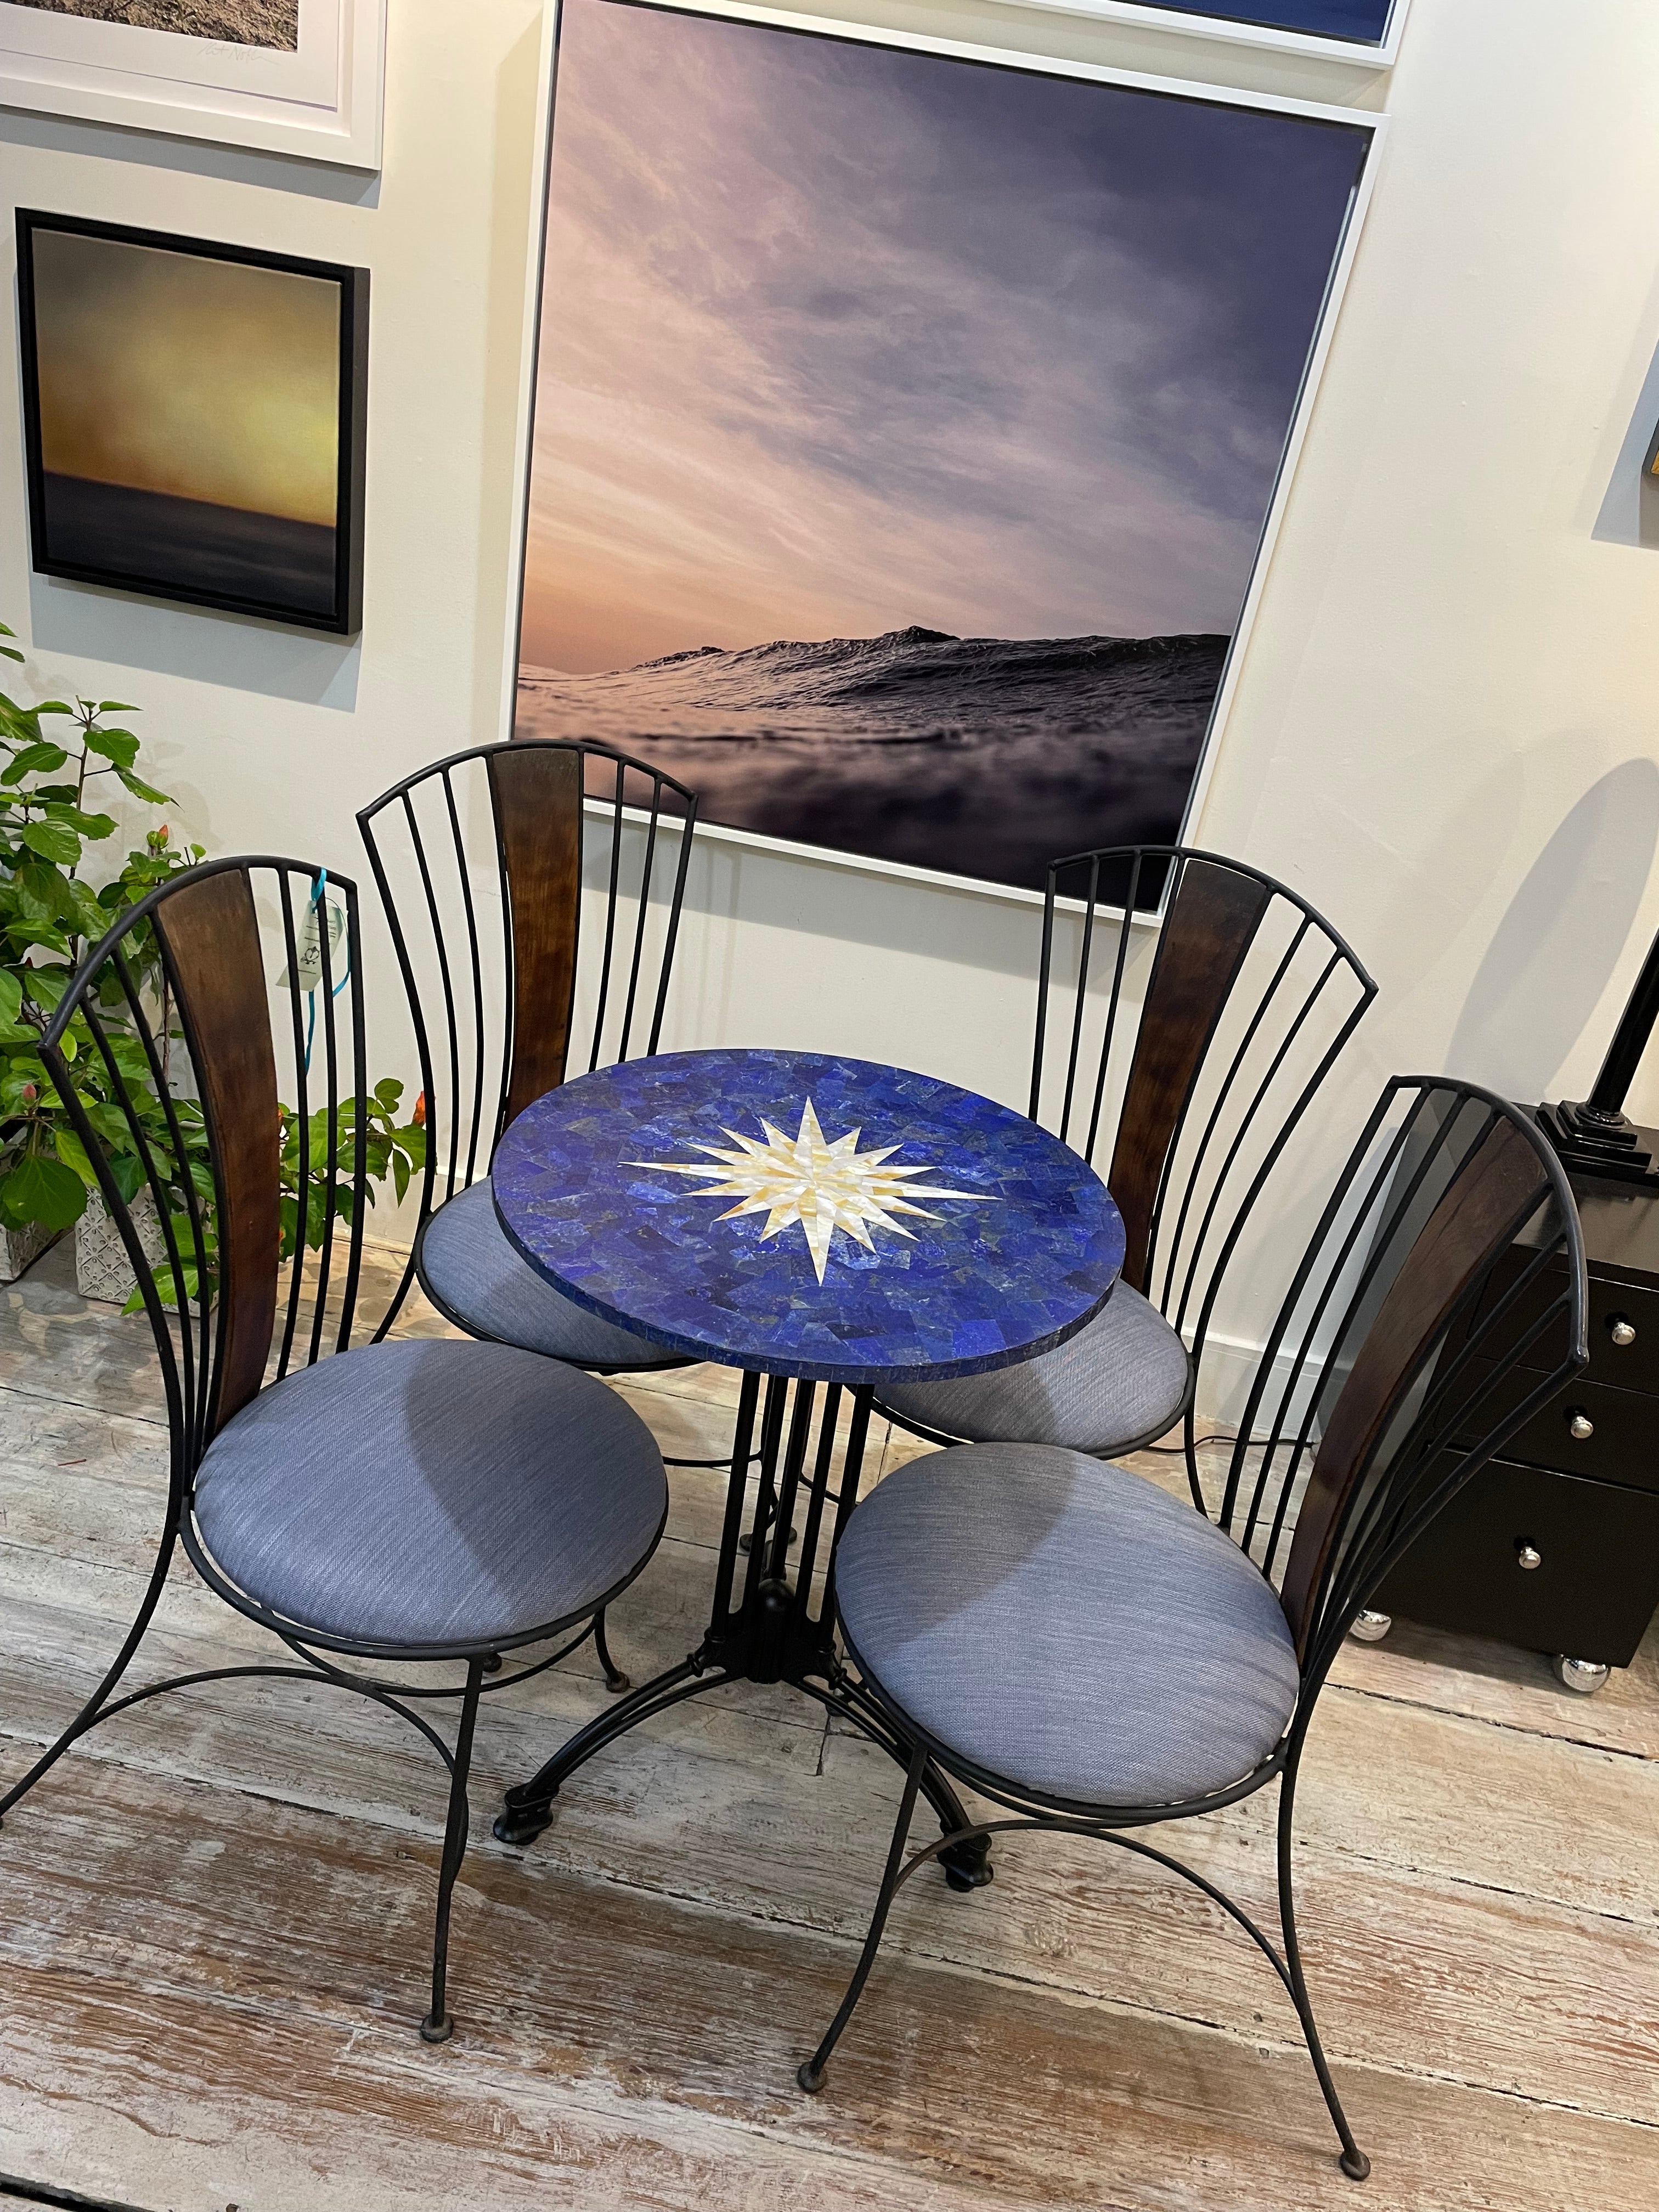 Lapis Lazuli pietra dura table top with mother of pearl inlay in a compass rose motif. Sits on an black aluminum base and features 4 iron chairs with a center wood back. Cushions are new blue sunbrella fabric. Great to use on a patio, porch,